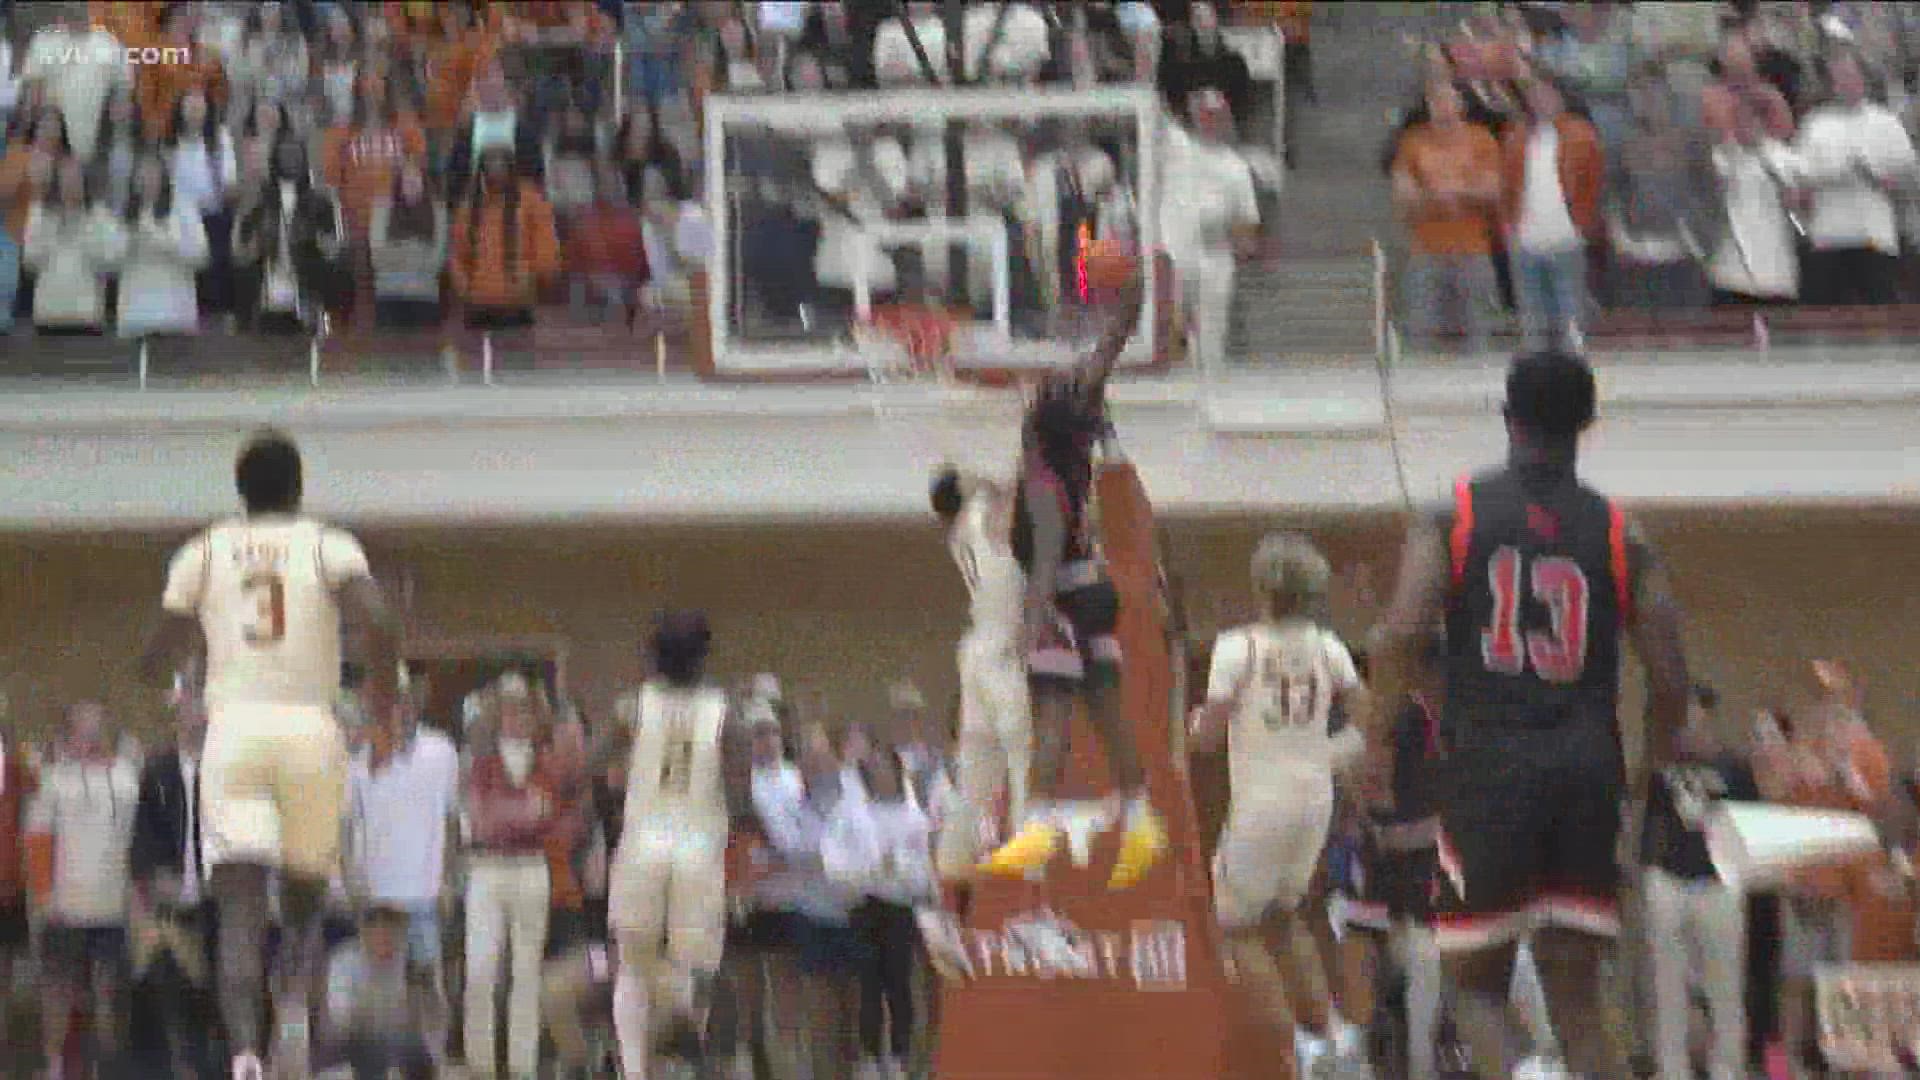 The Longhorns topped Sam Houston State, 73-57, in the men’s basketball team’s first game in Gregory Gym since 1977.